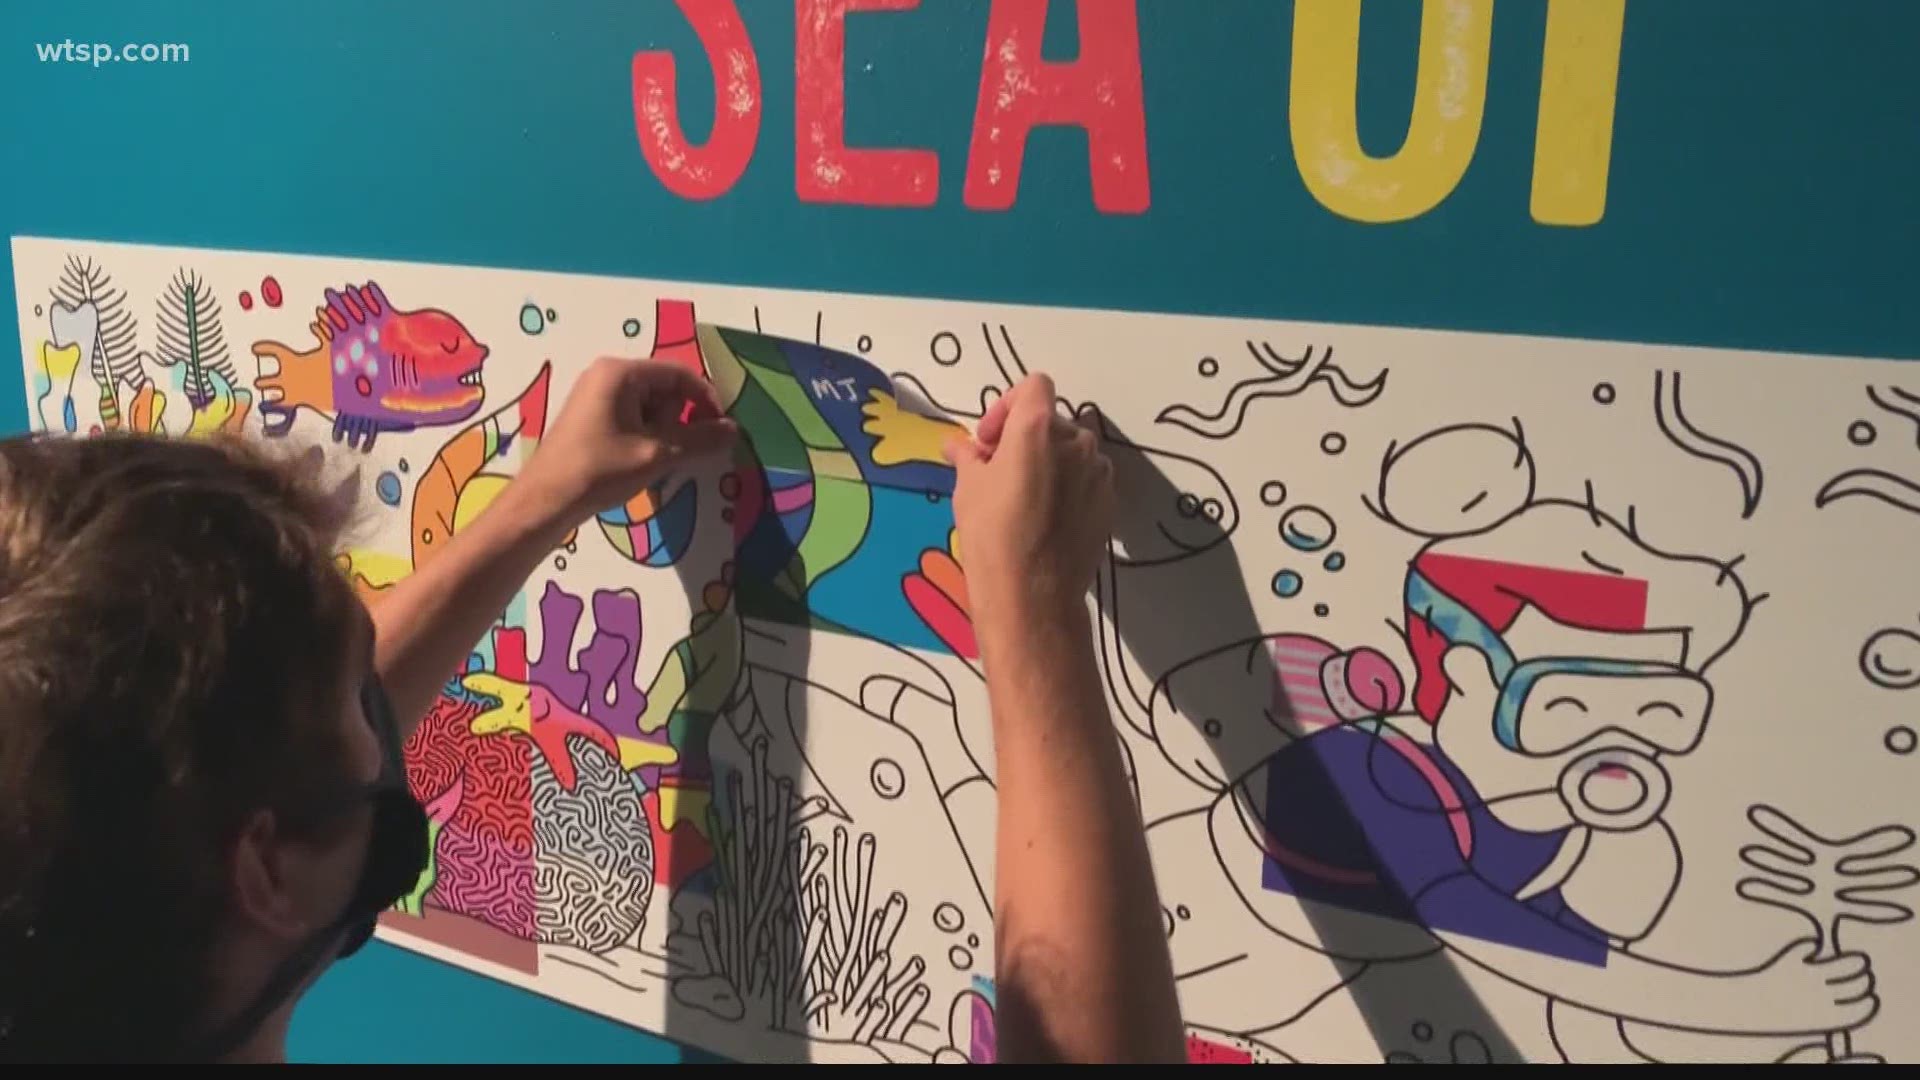 The Florida Aquarium debuted its "Sea Of Colors" mural on Monday to coincide with World Oceans Day.